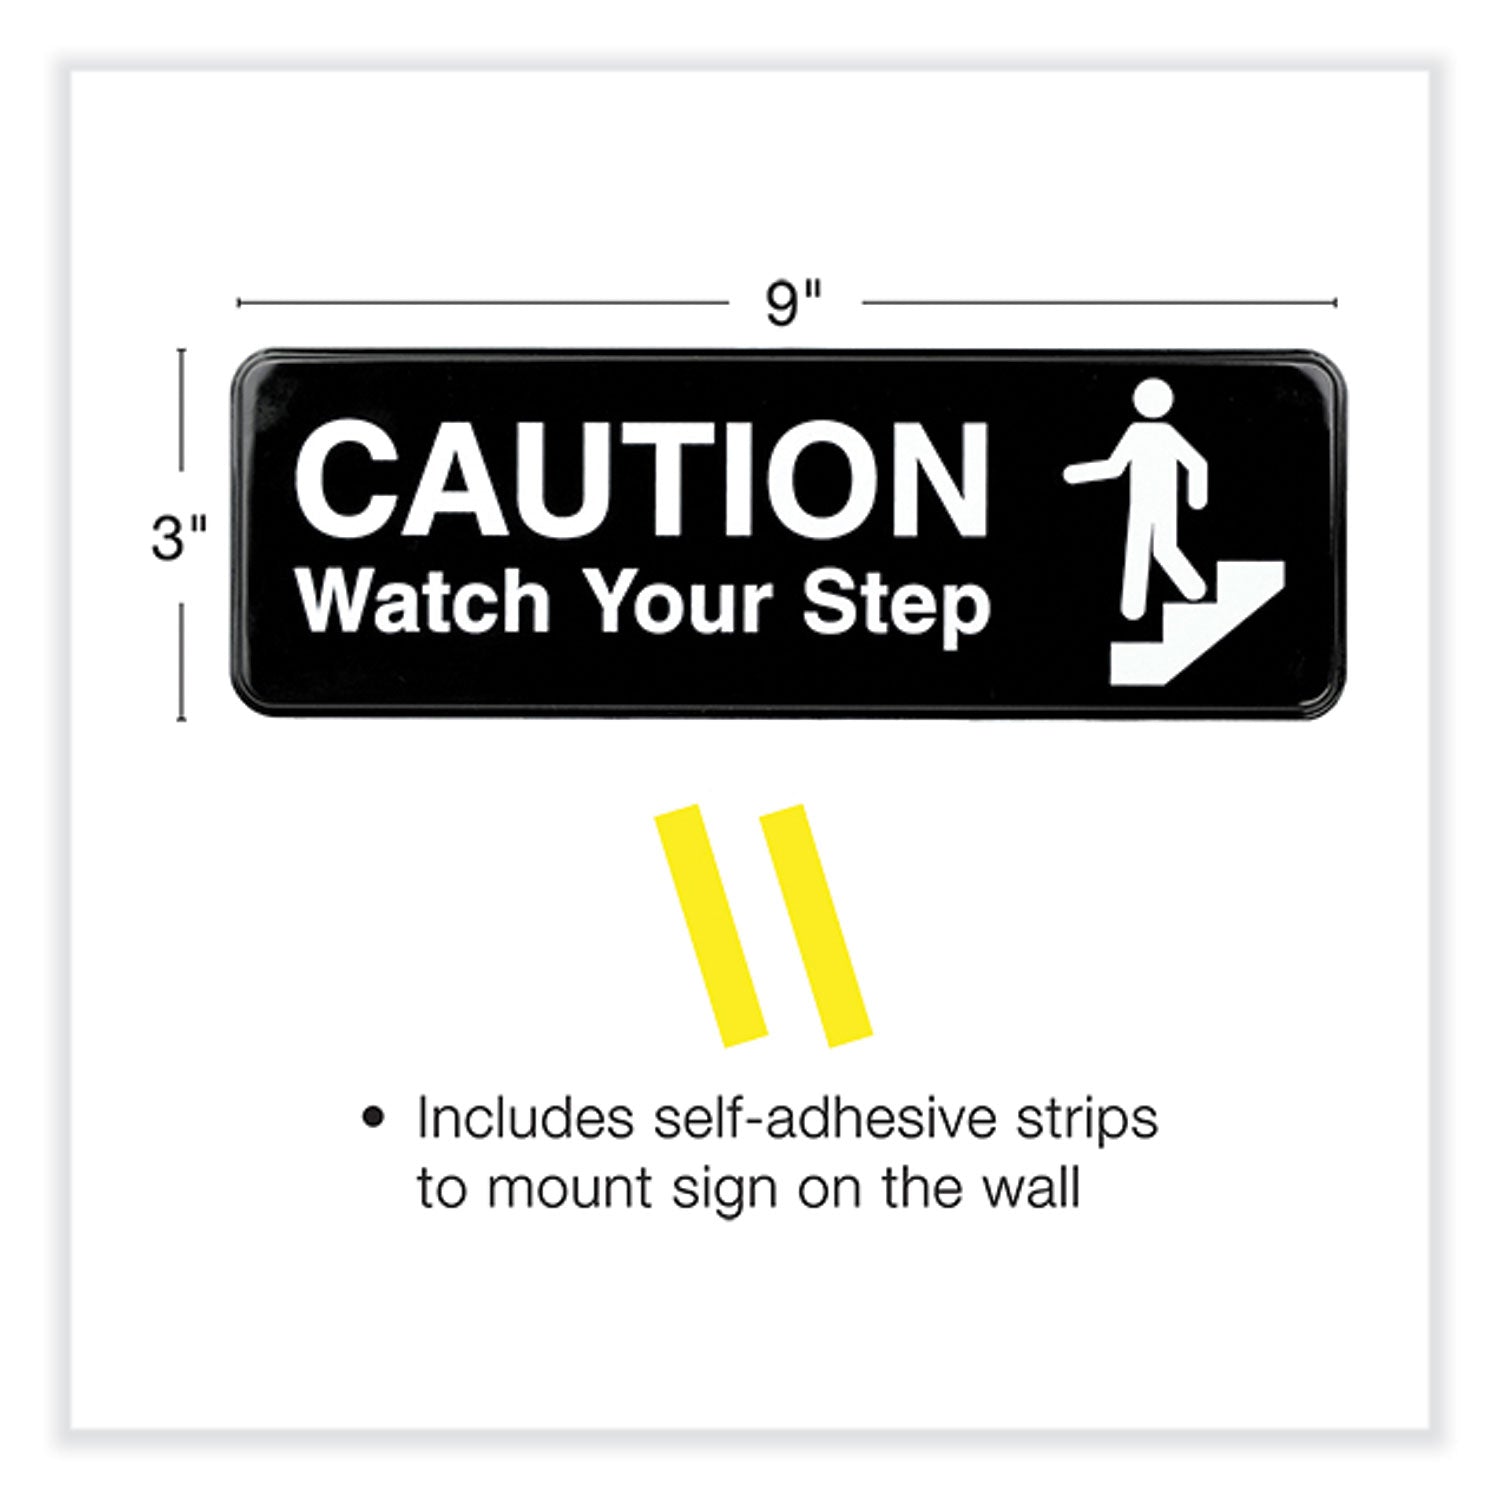 caution-watch-your-step-indoor-outdoor-wall-sign-9-x-3-black-face-white-graphics-3-pack_exohd0268s - 2